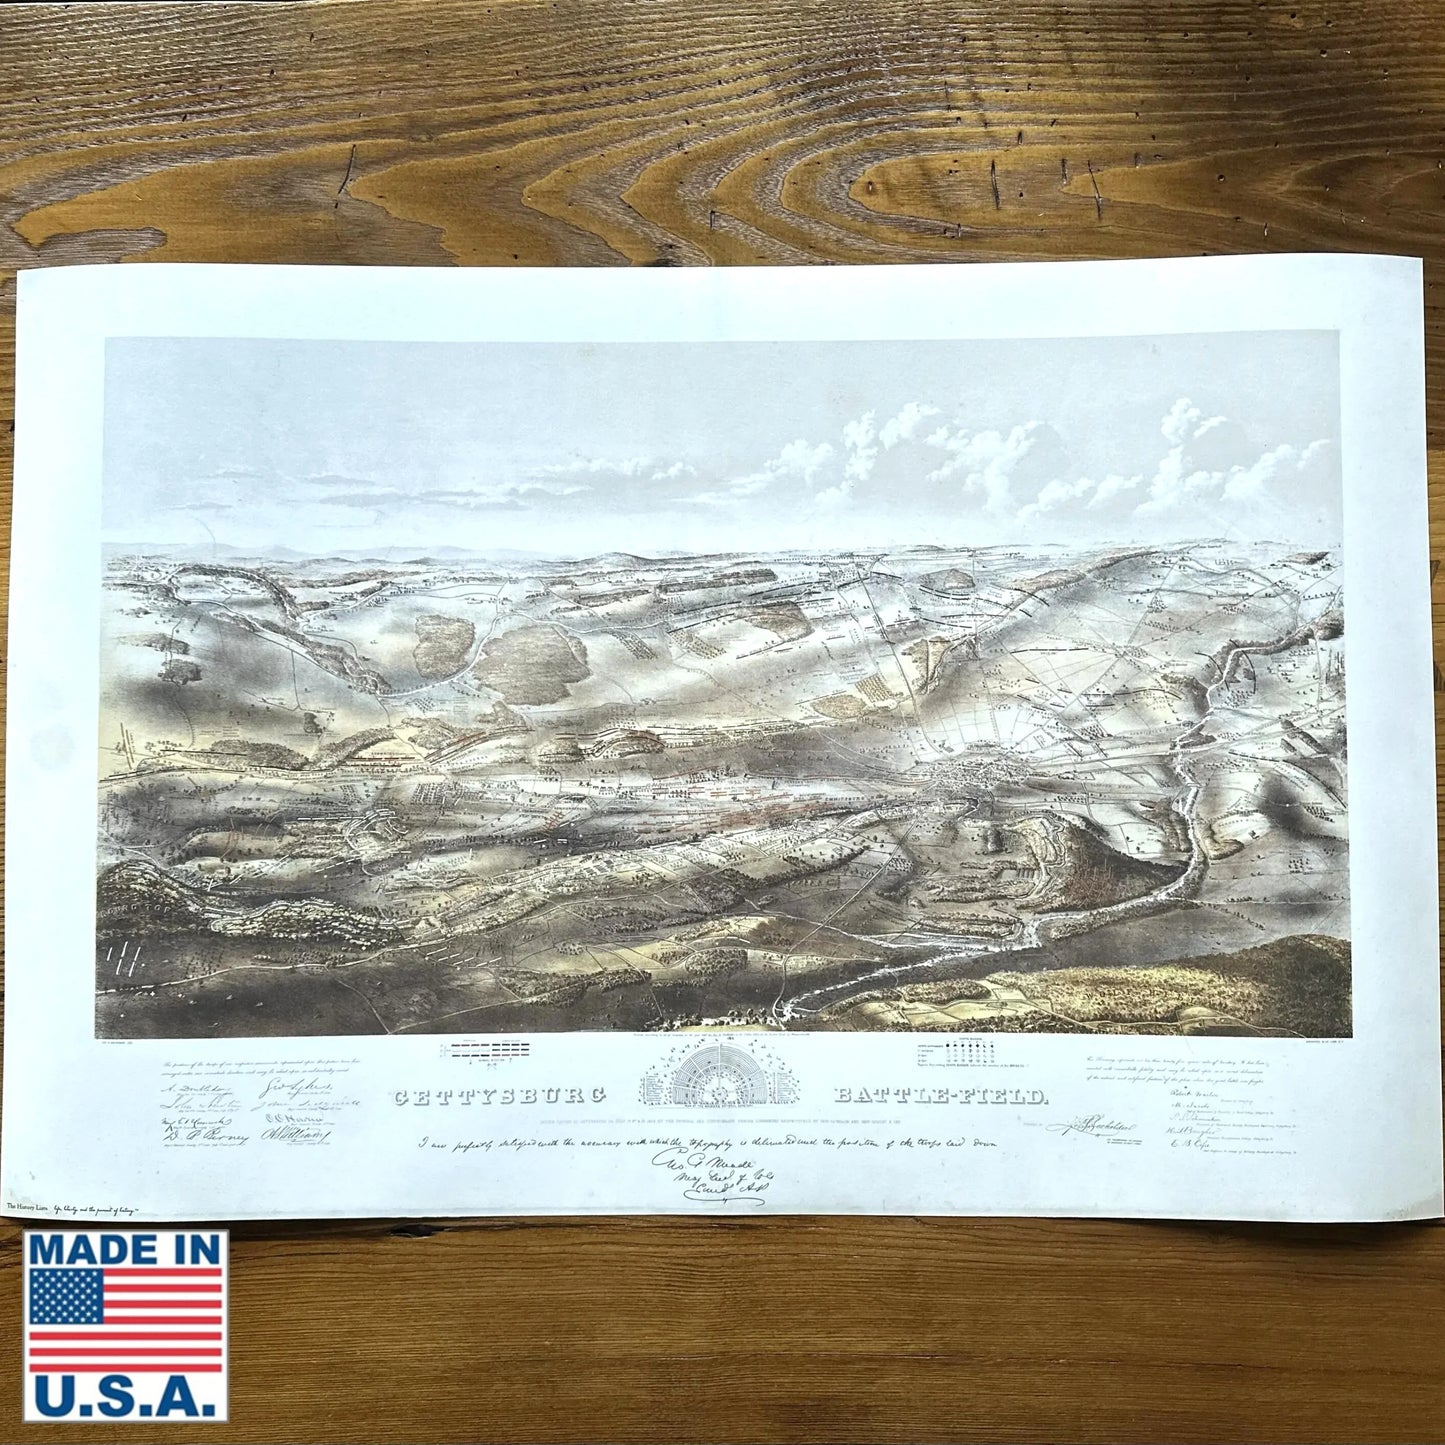 Famous Gettysburg print, 24" x 36" reproduced in archival quality